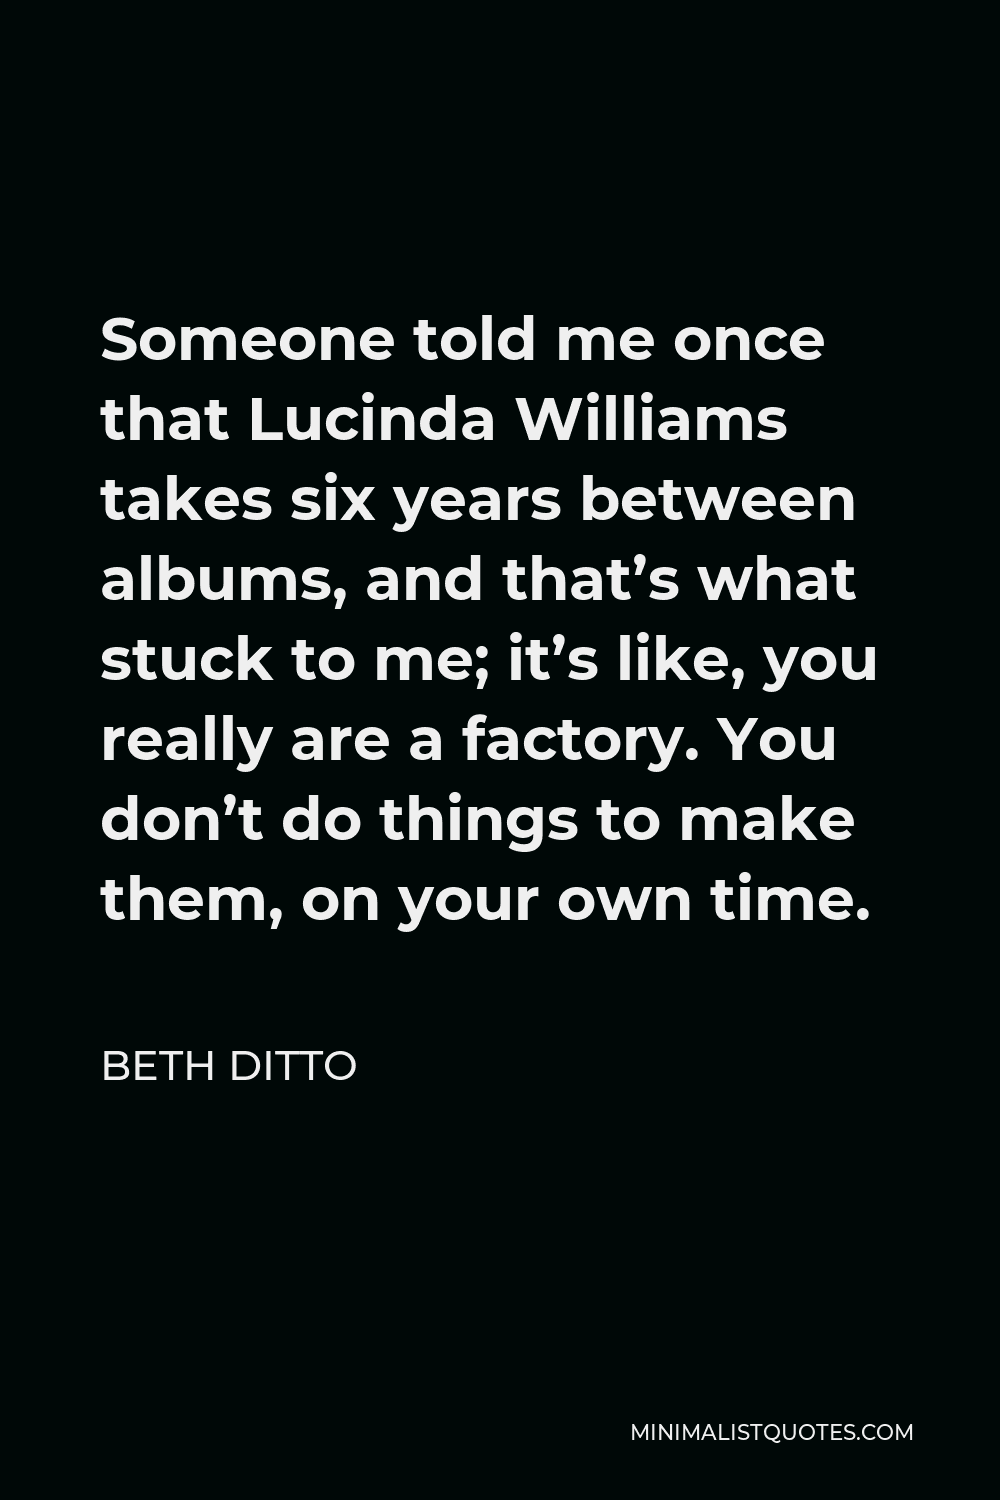 Beth Ditto Quote - Someone told me once that Lucinda Williams takes six years between albums, and that’s what stuck to me; it’s like, you really are a factory. You don’t do things to make them, on your own time.